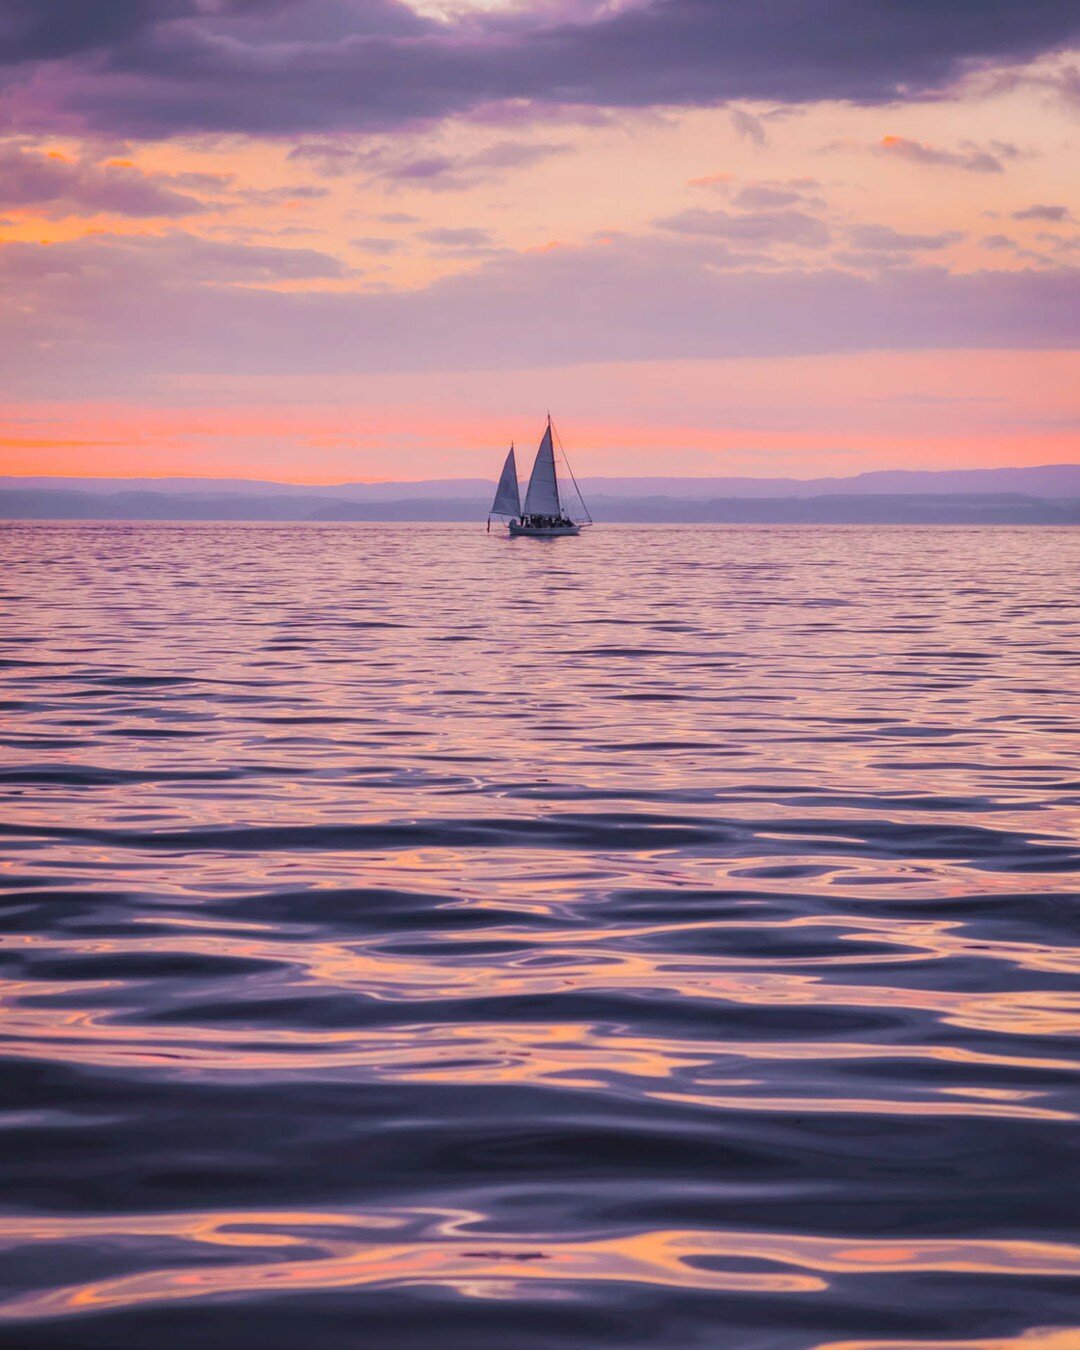 Bring me that horizon.

I might be just me, but I often fantasize about jumping onto a boat and spending the rest of my days drinking rum and hunting for treasure.

Lake Taupo is definitely one of our favourite places to visit in NZ and it holds a lo